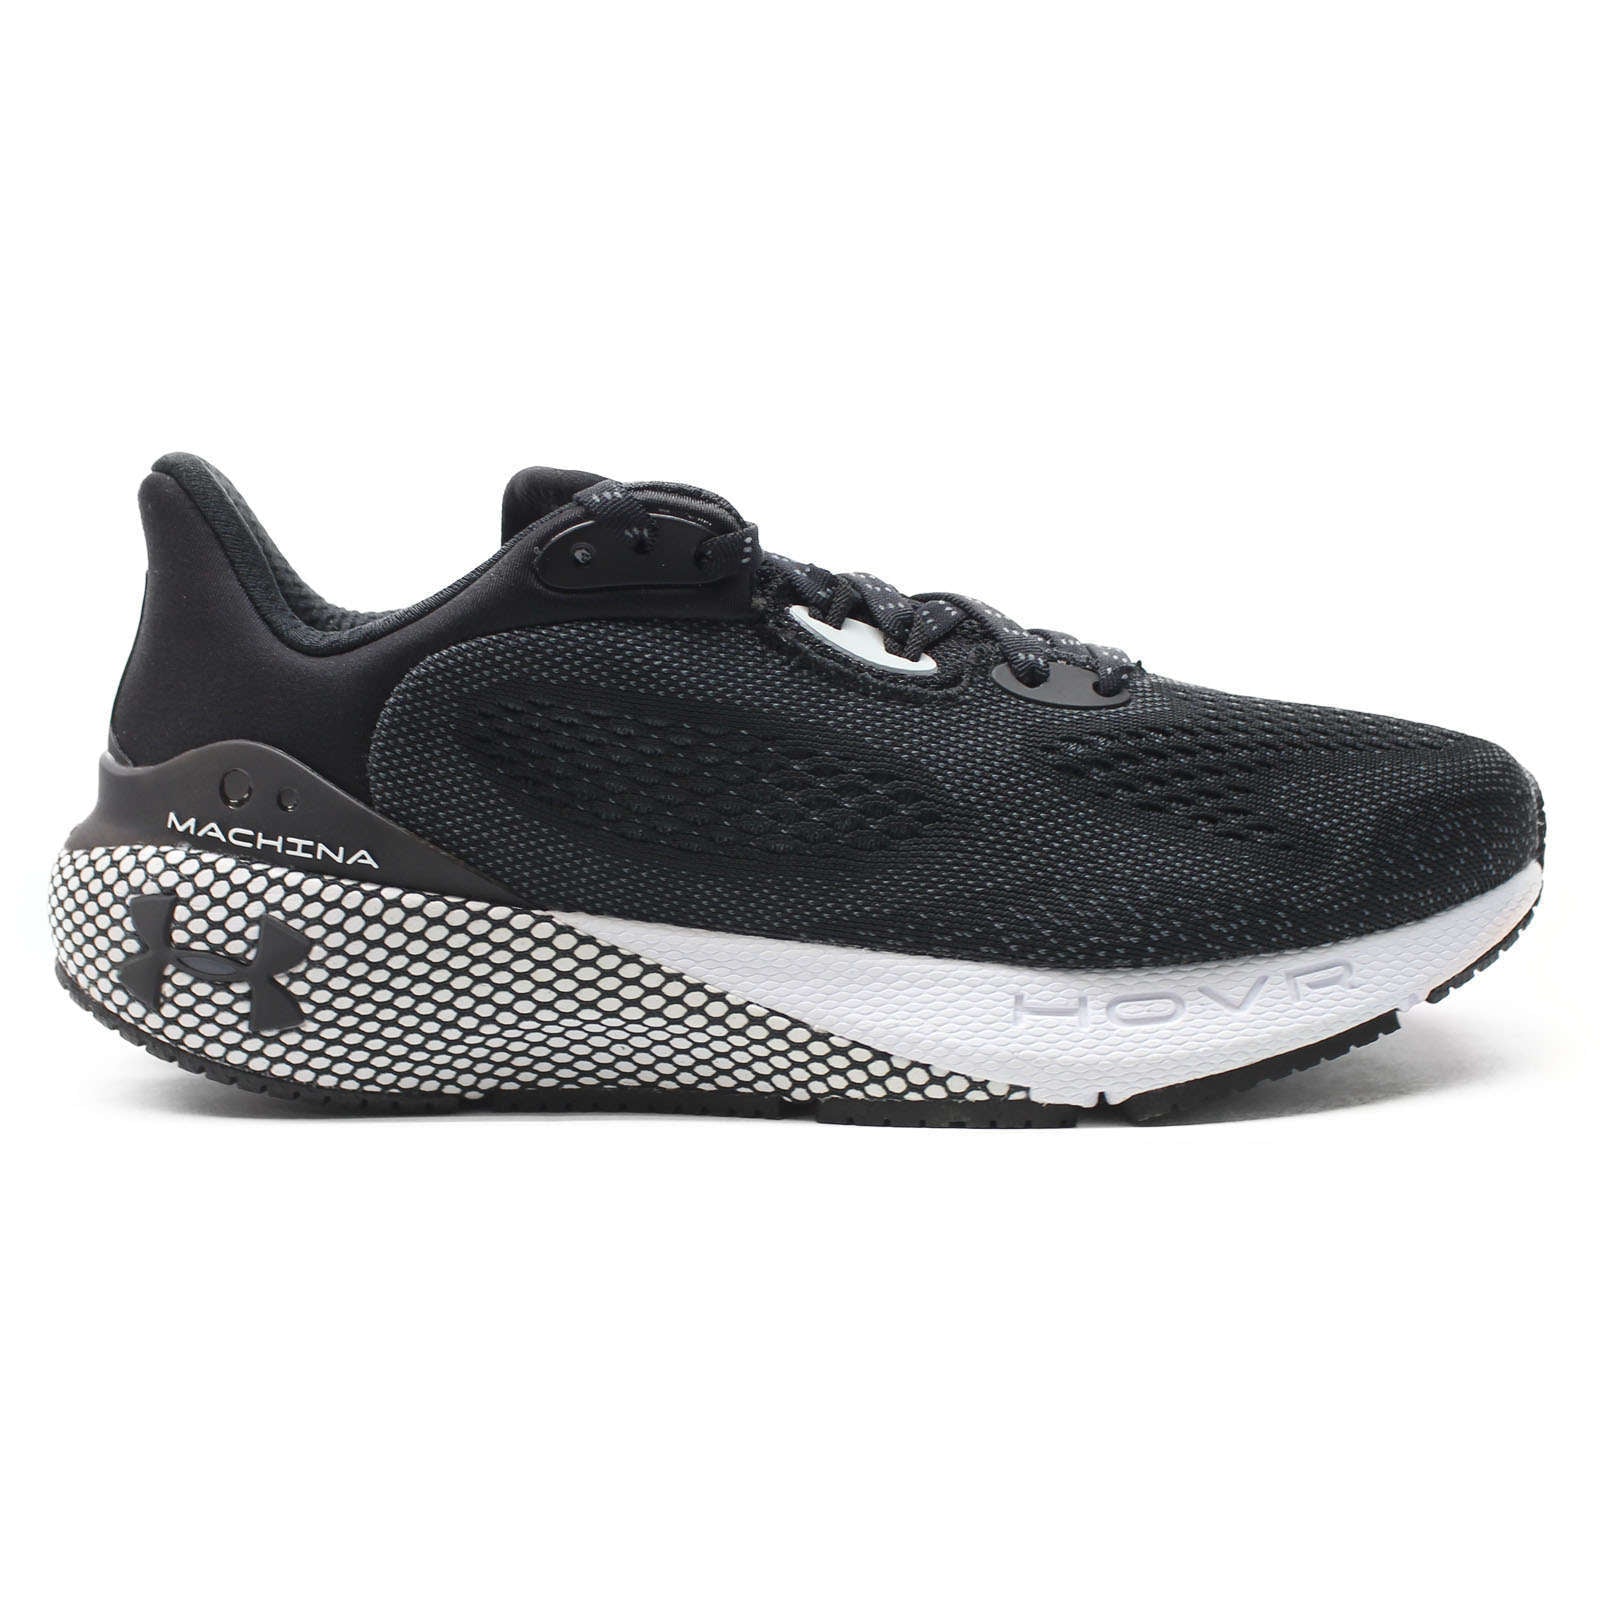 Under Armour HOVR Machina 3 Synthetic Textile Women's Low-Top Sneakers#color_black white